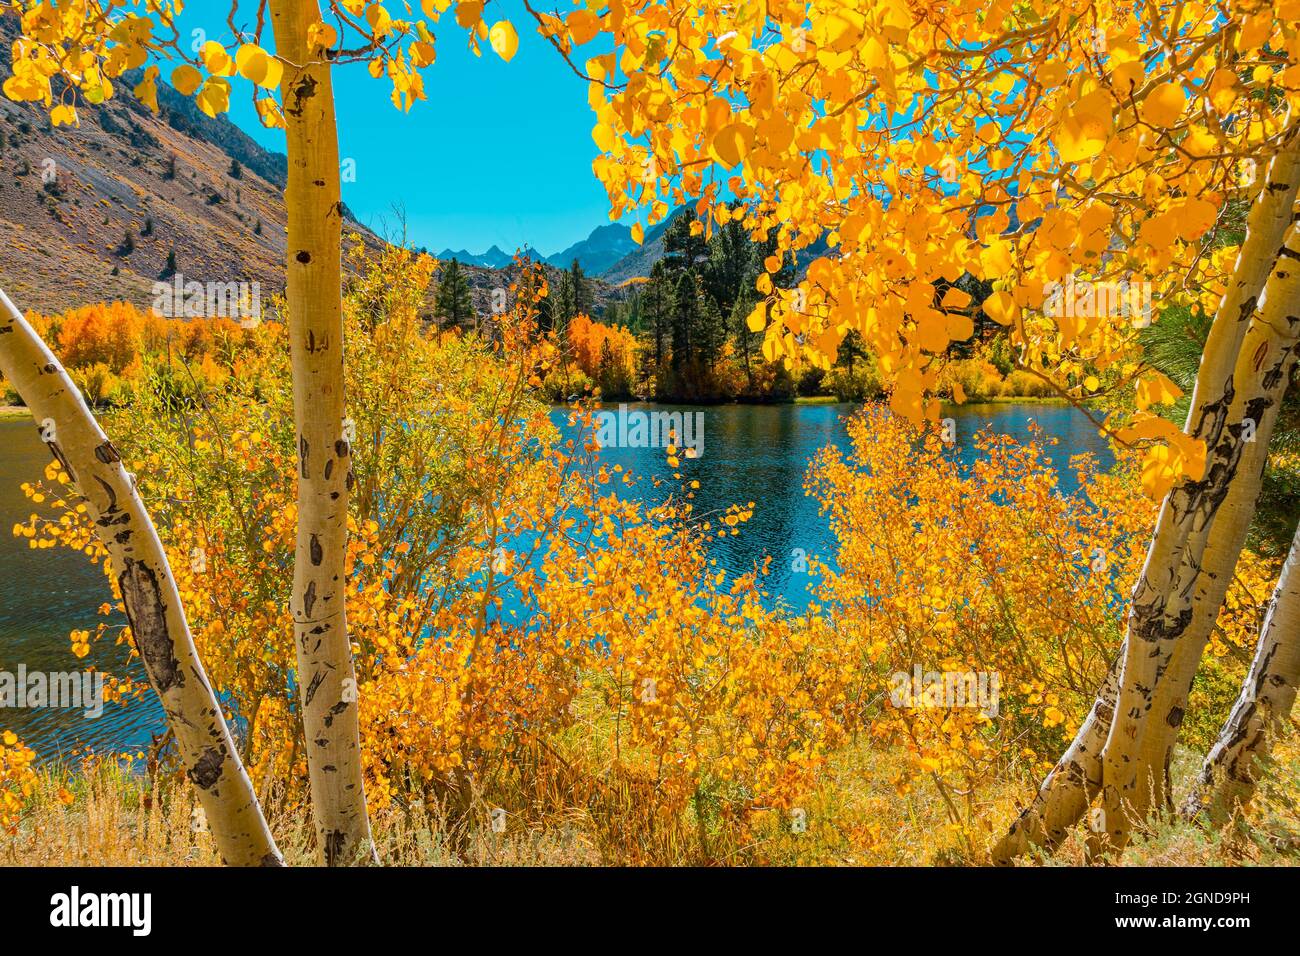 Golden aspens grow next to a reflecting pond that is surrounded by fall color and evergreen trees in the Bishop Creek area of Central California Stock Photo